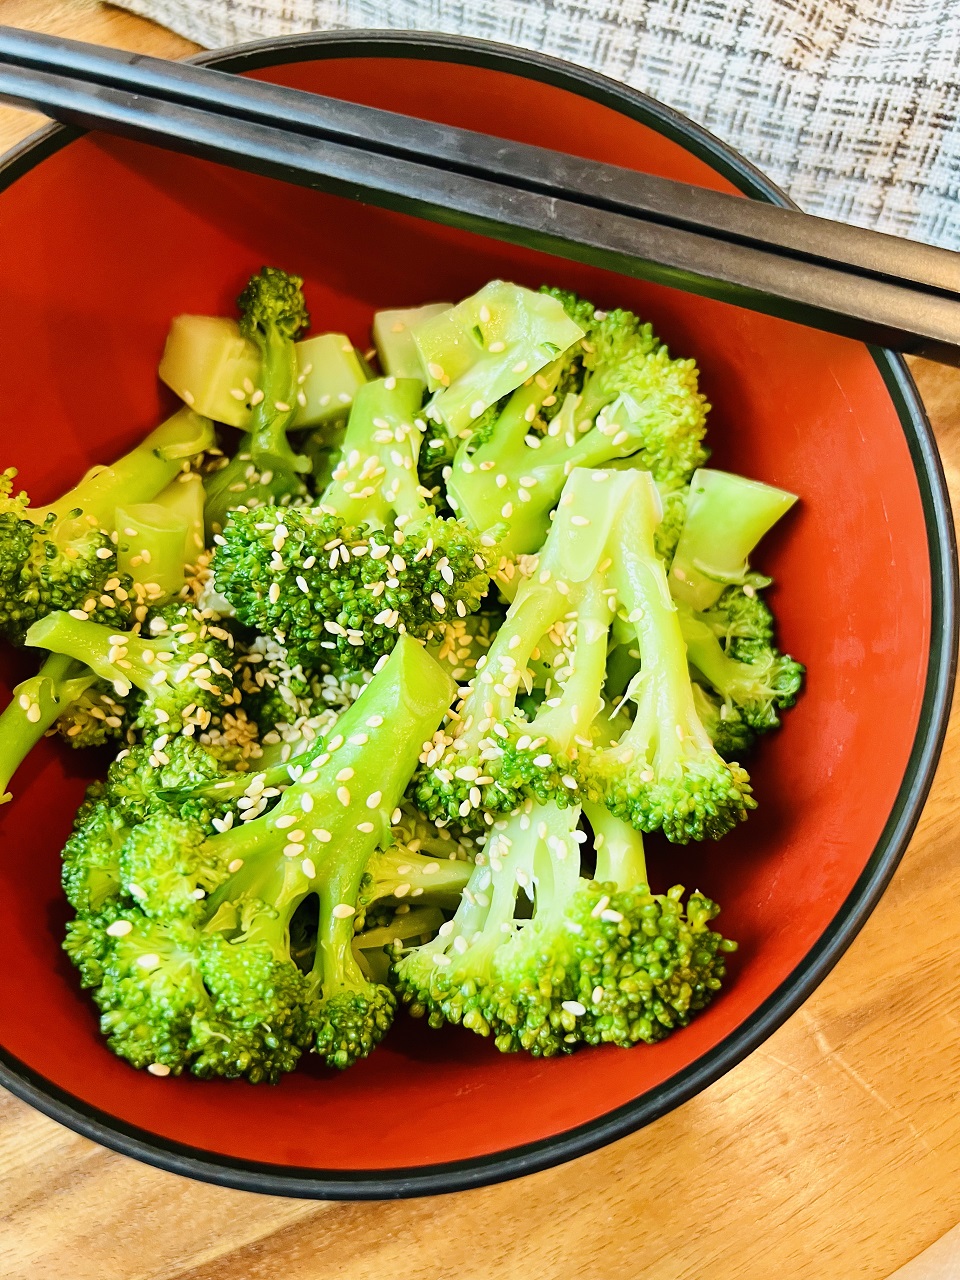 Broccoli with sesame seeds in a bowl